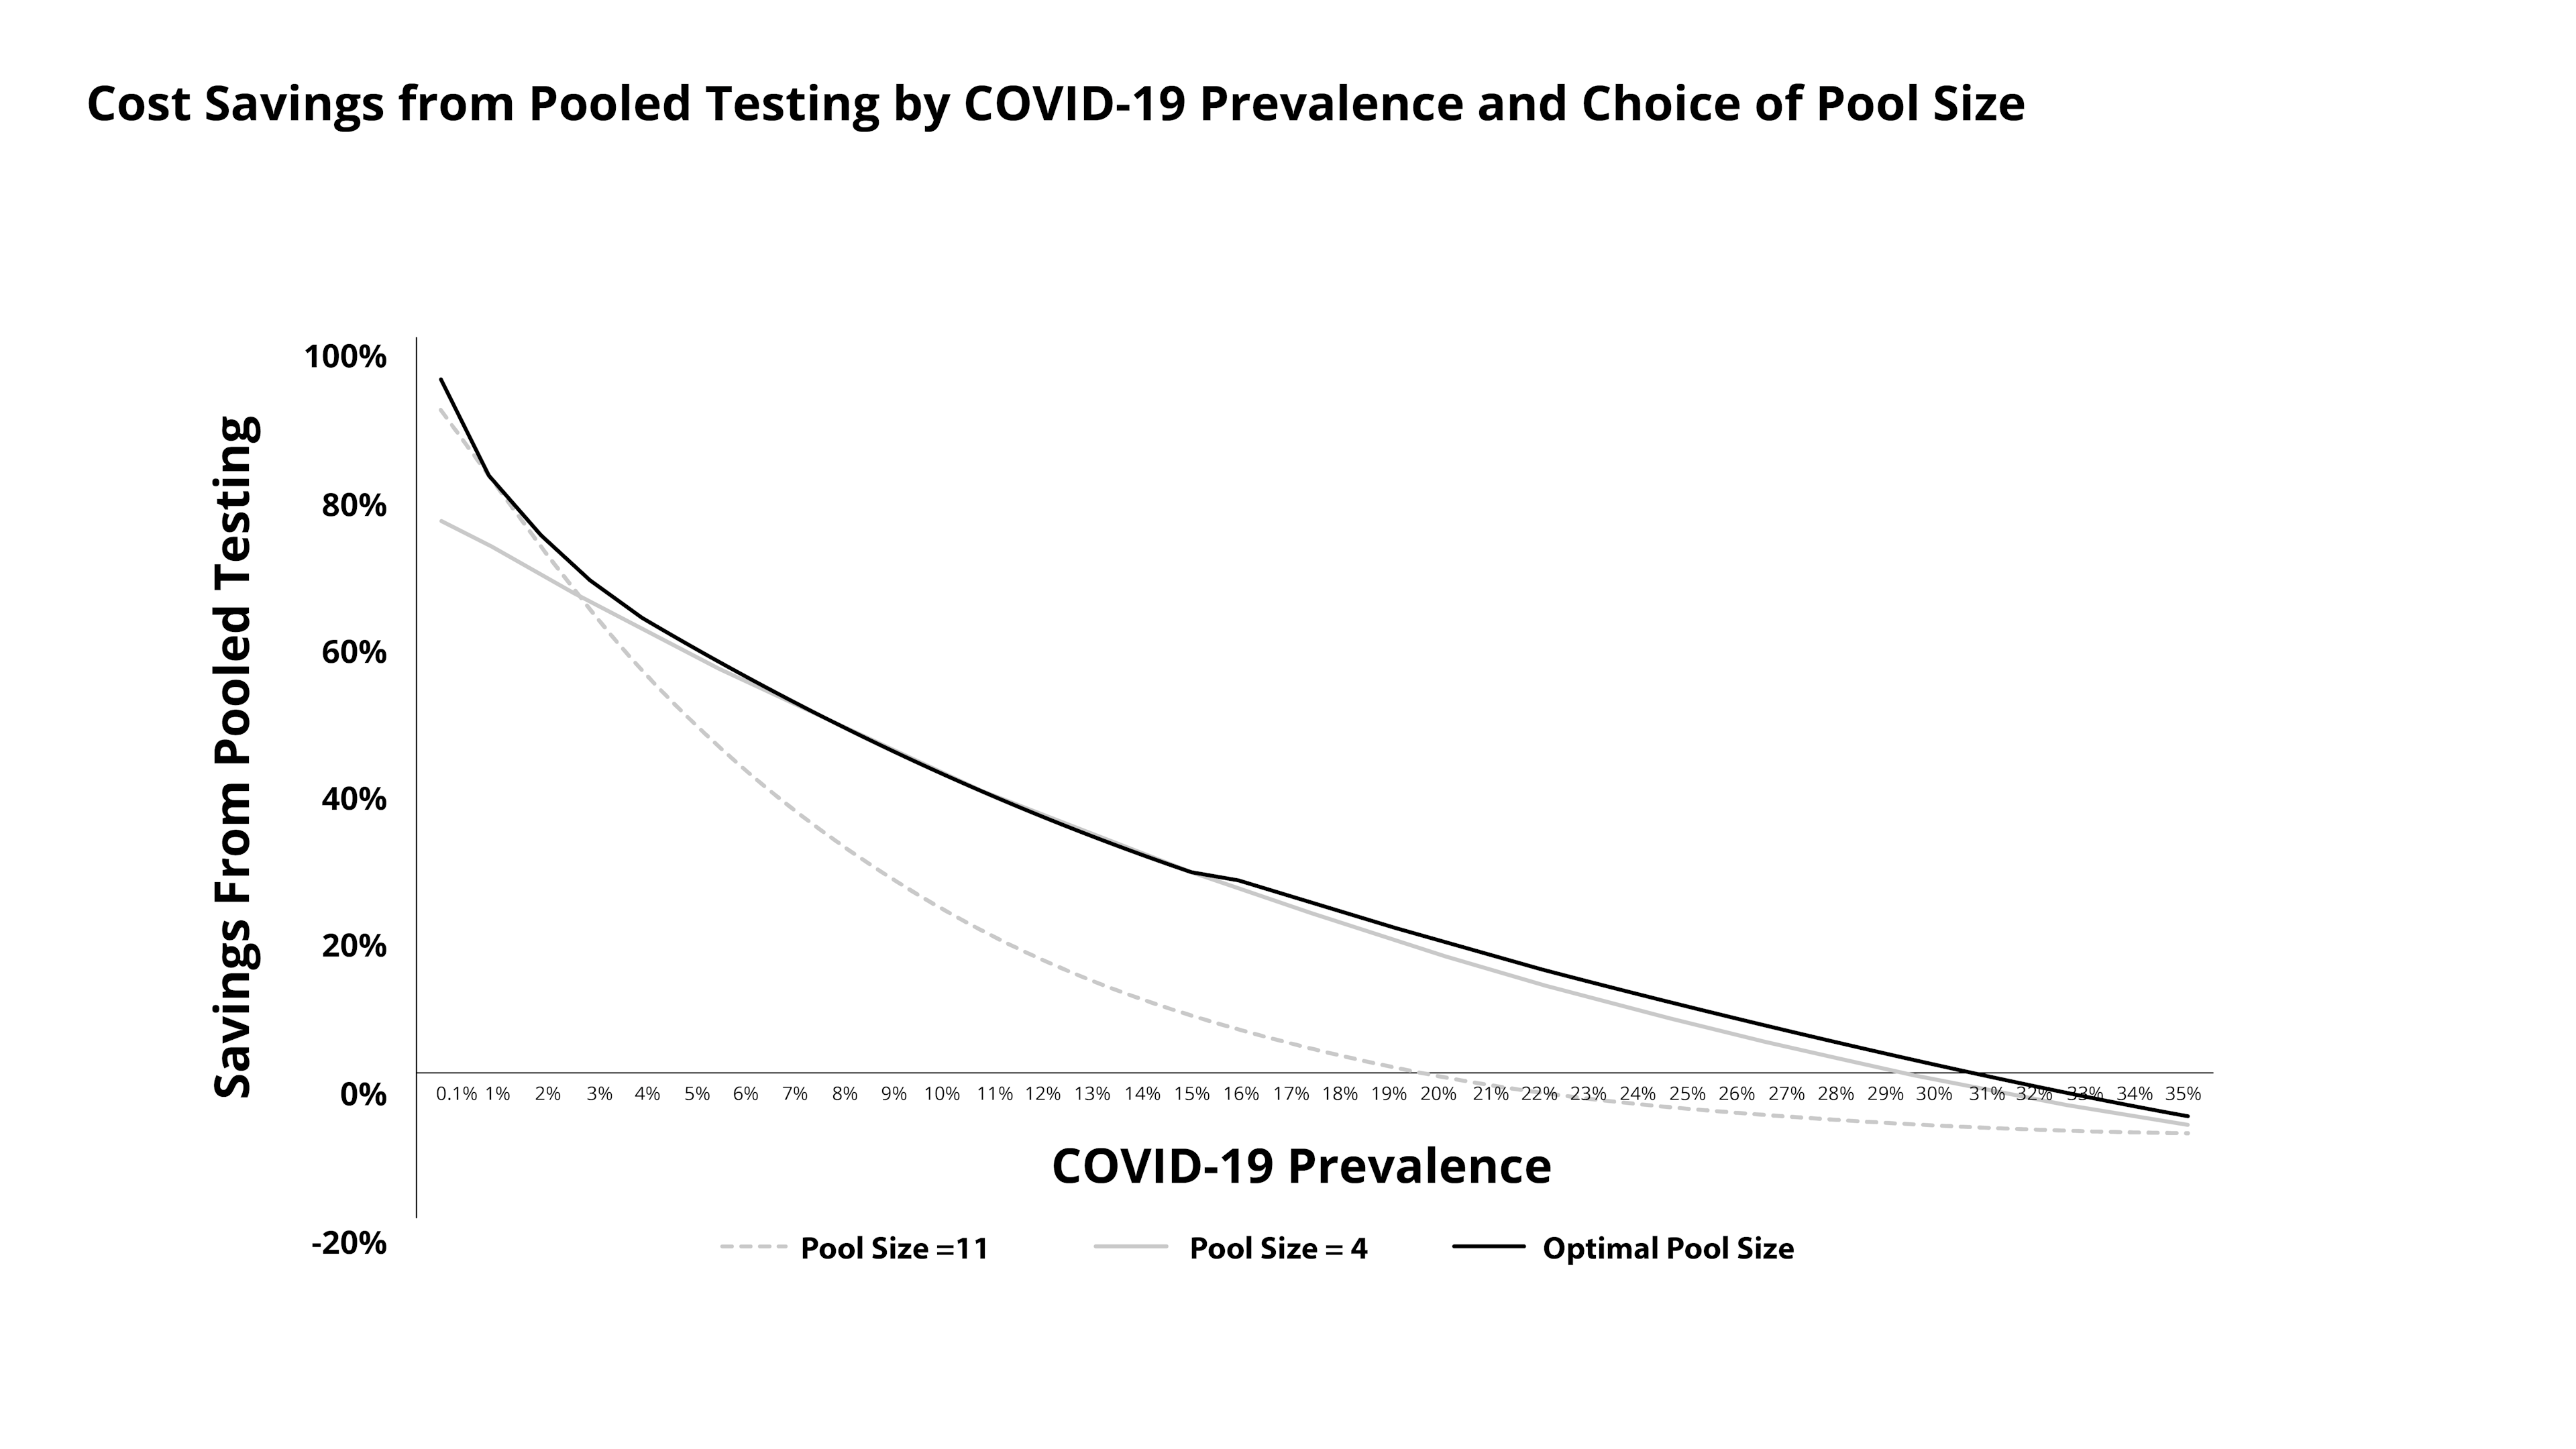 Cost savings from pool testing